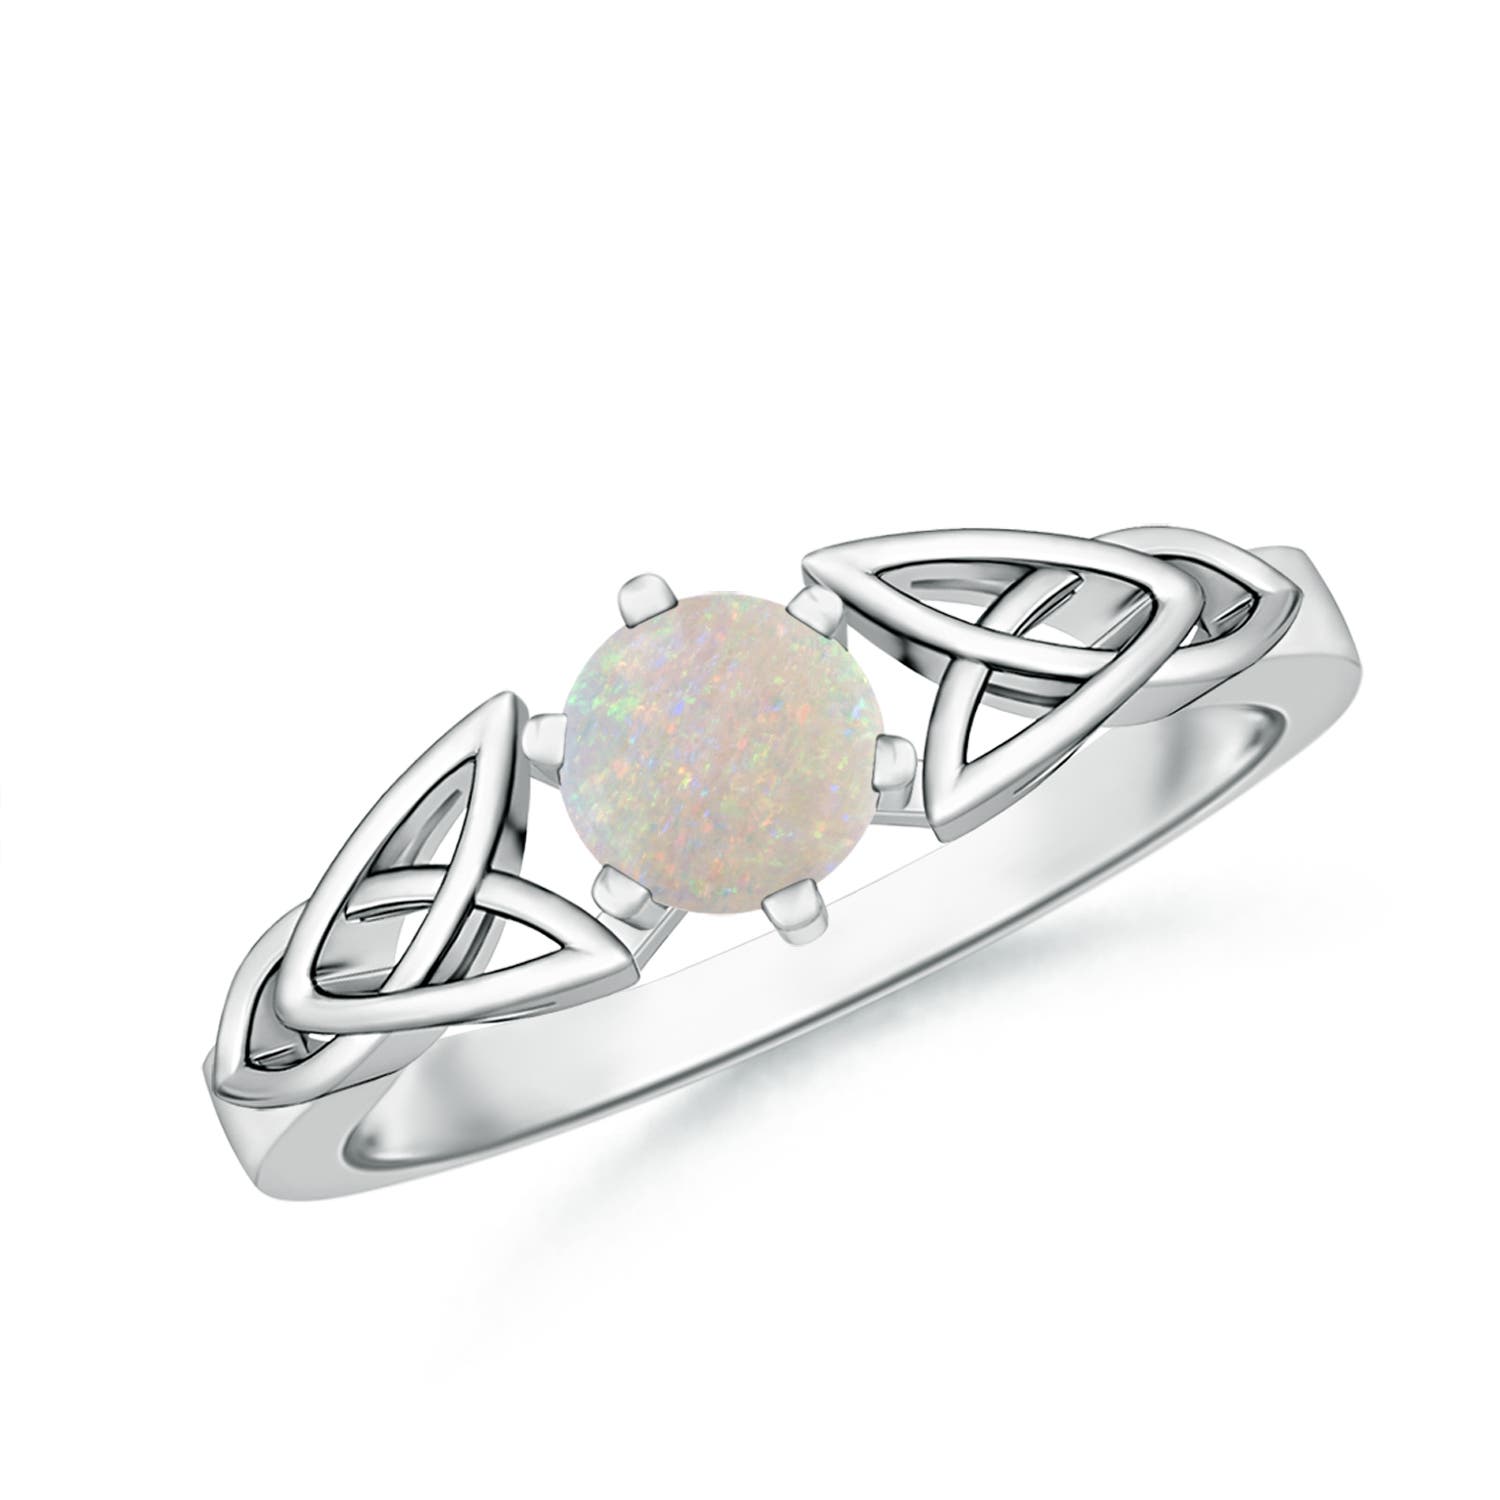 AA - Opal / 0.33 CT / 14 KT White Gold